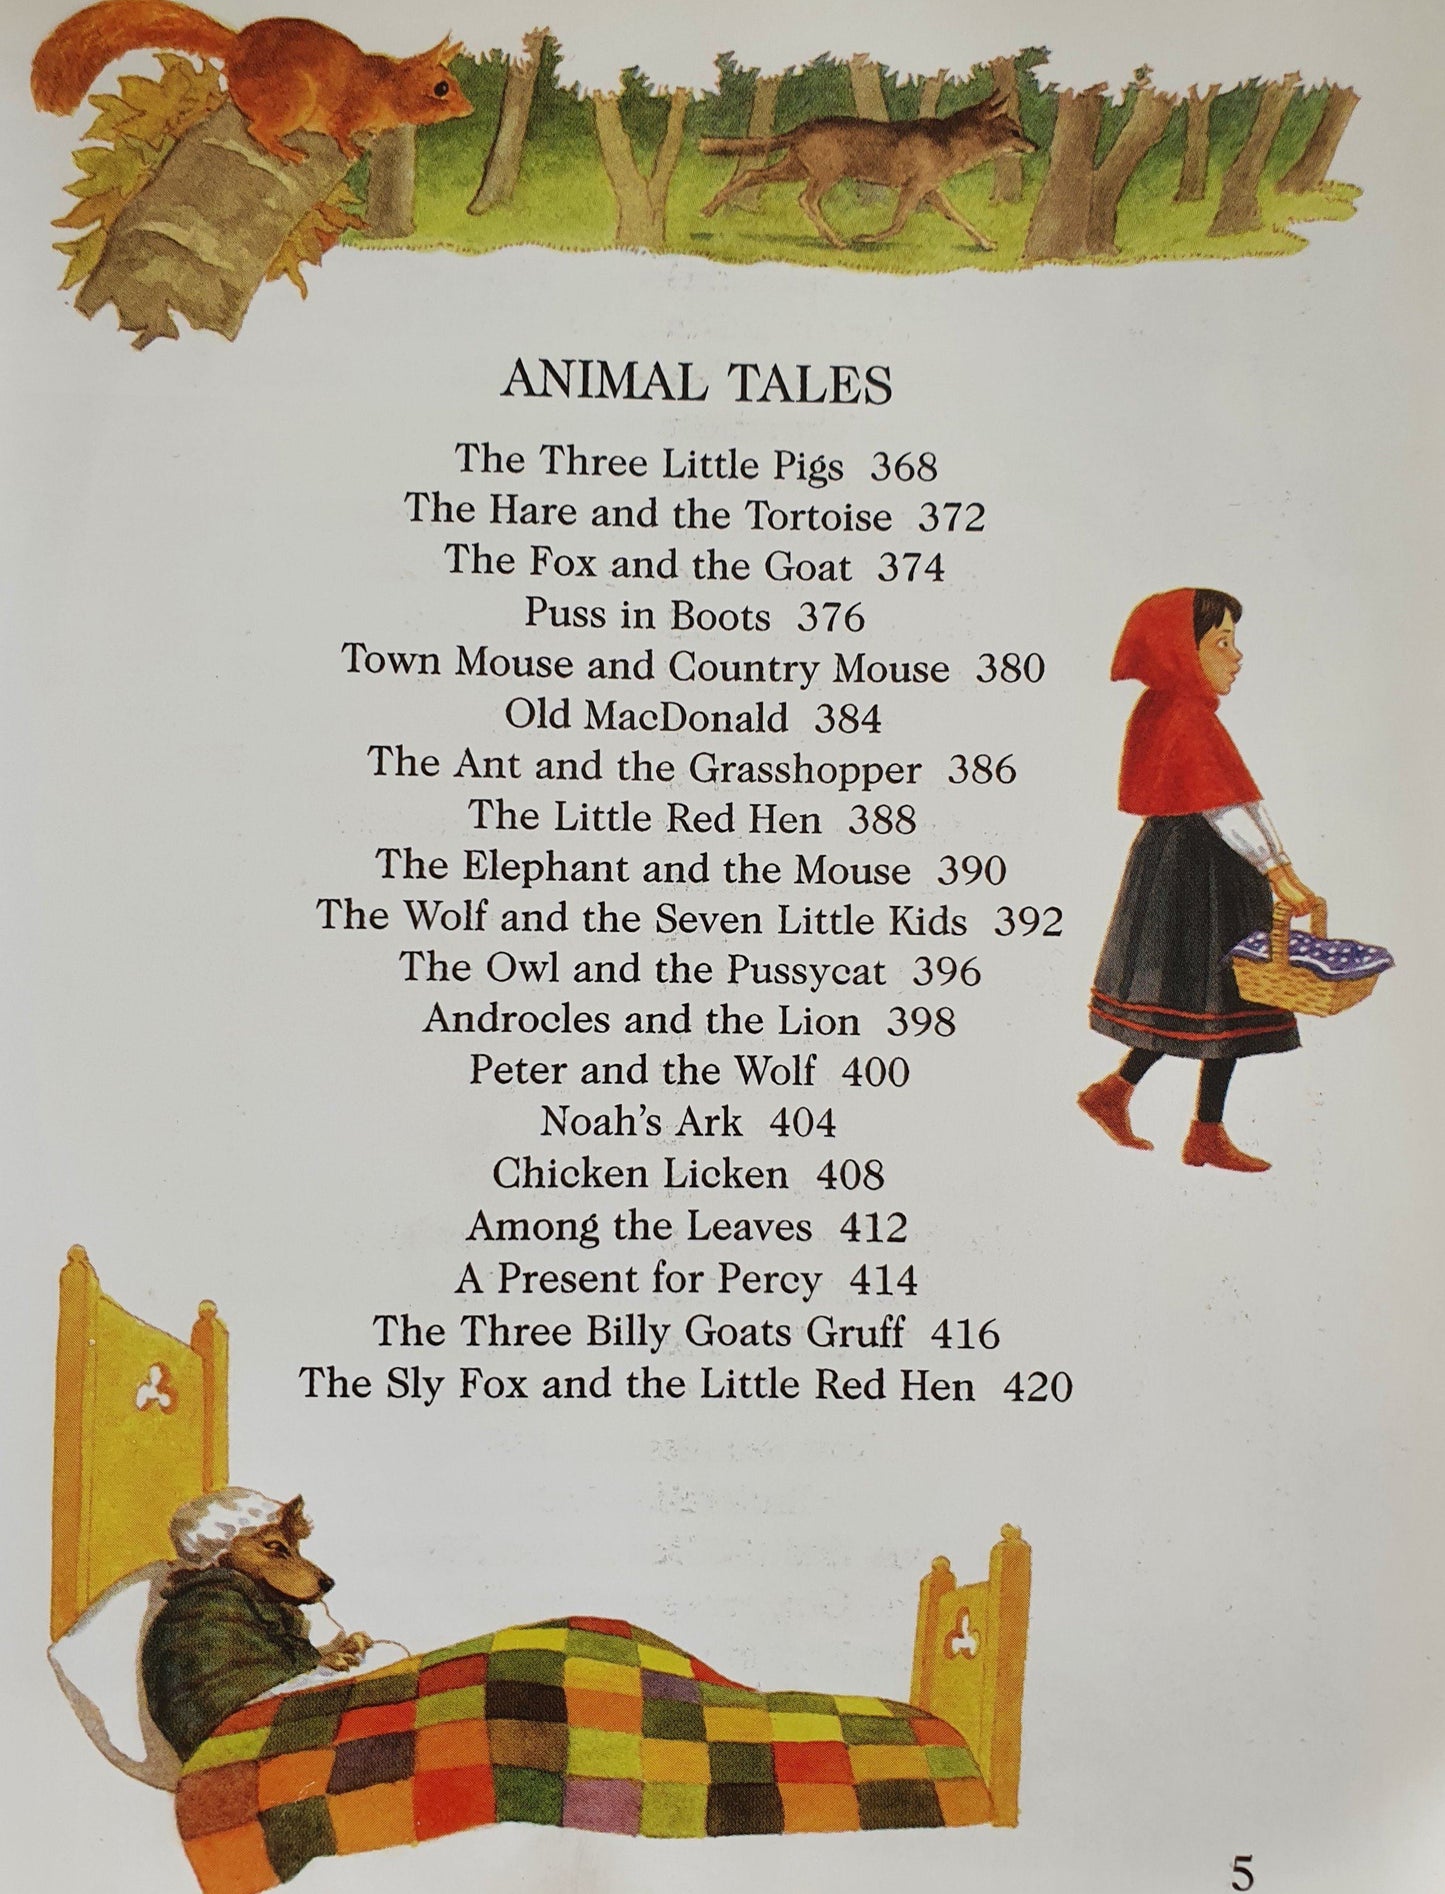 The great big book of stories and rhymes Very Good, 5+ Age Recuddles.ch  (6332484485305)